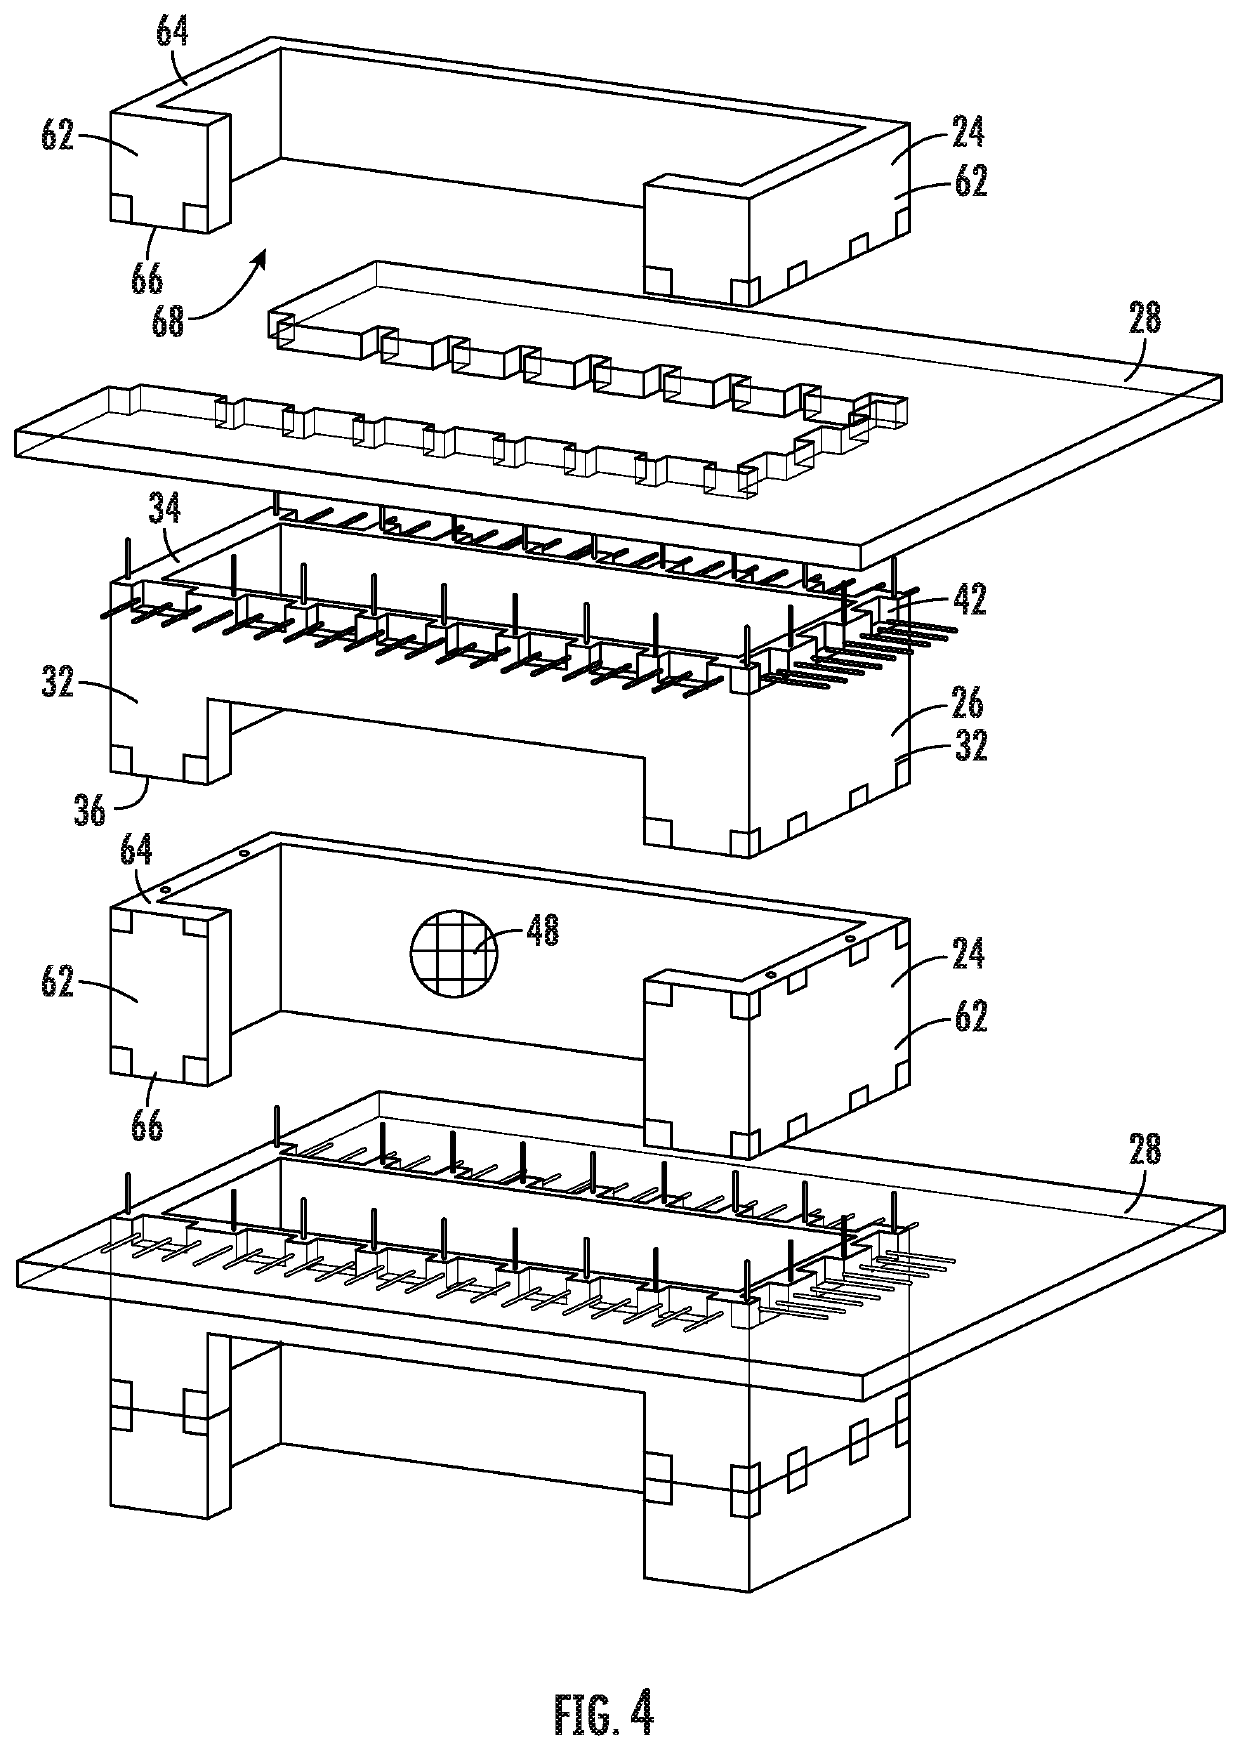 Structures for Use in Erecting Multistory Buildings and Methods for Making Such Structures